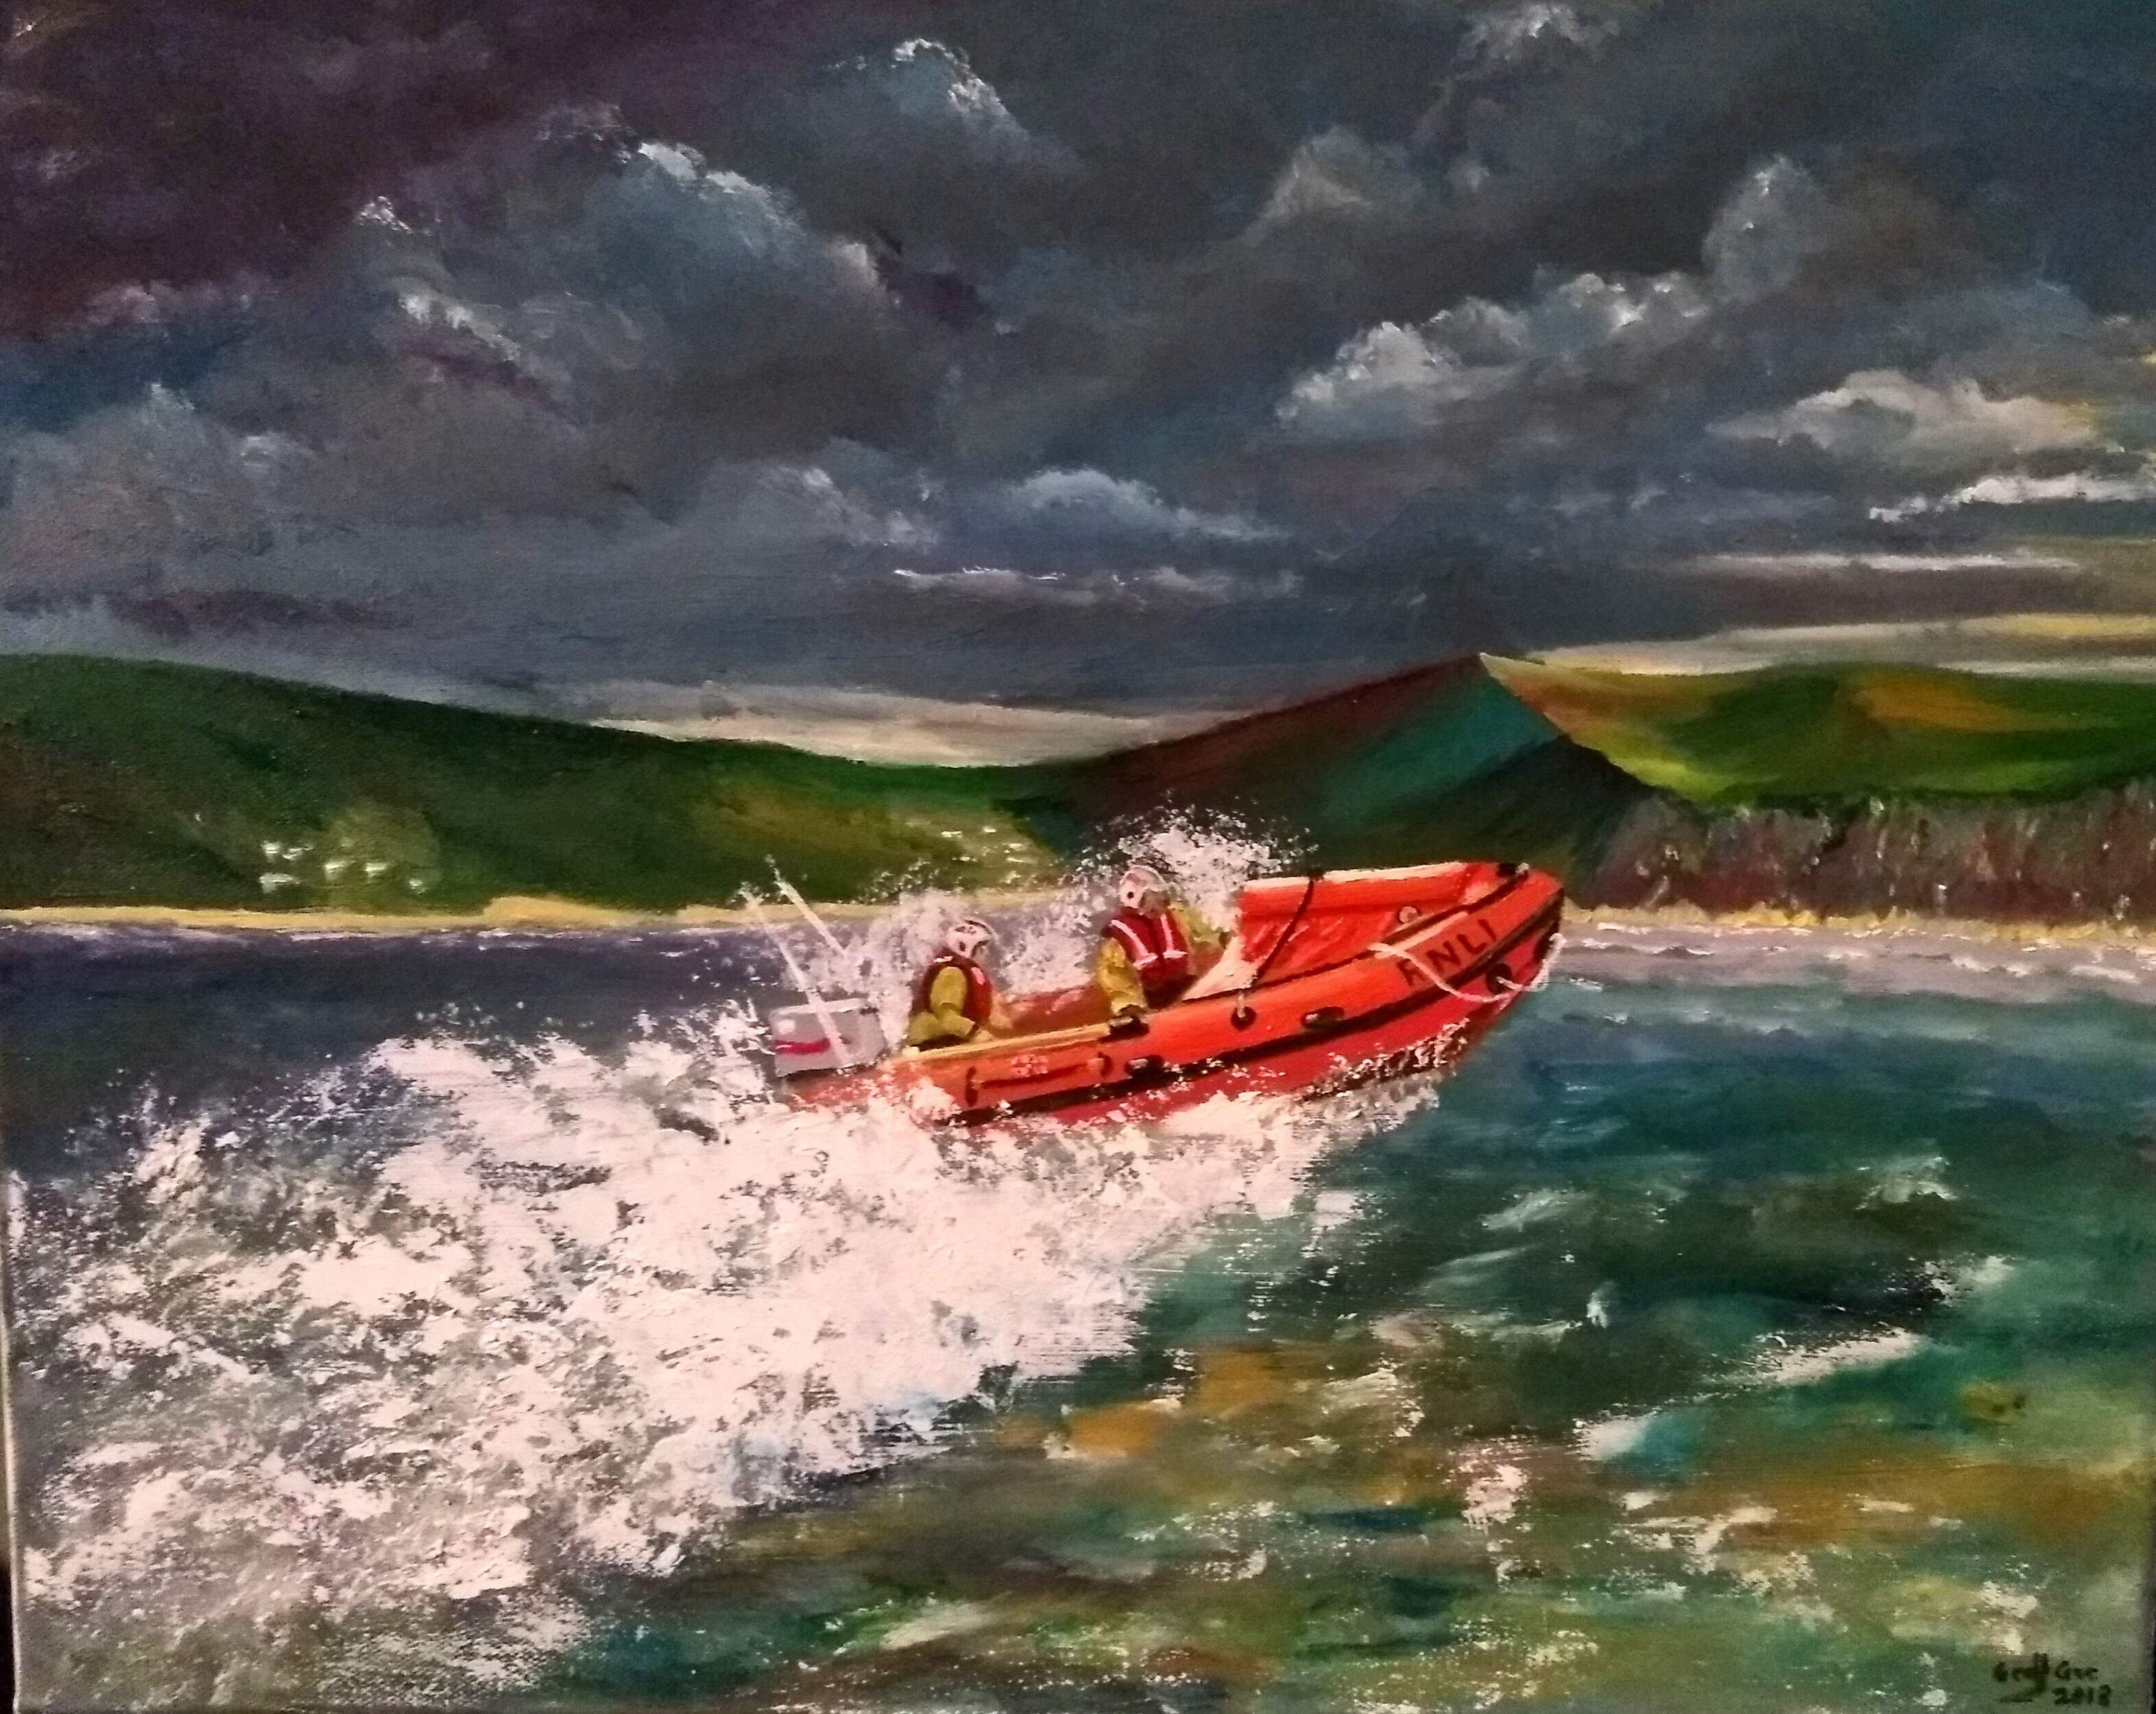 Braving the Sea (185) - Oil on Canvas 20"x16" Price - Donated to RNLI